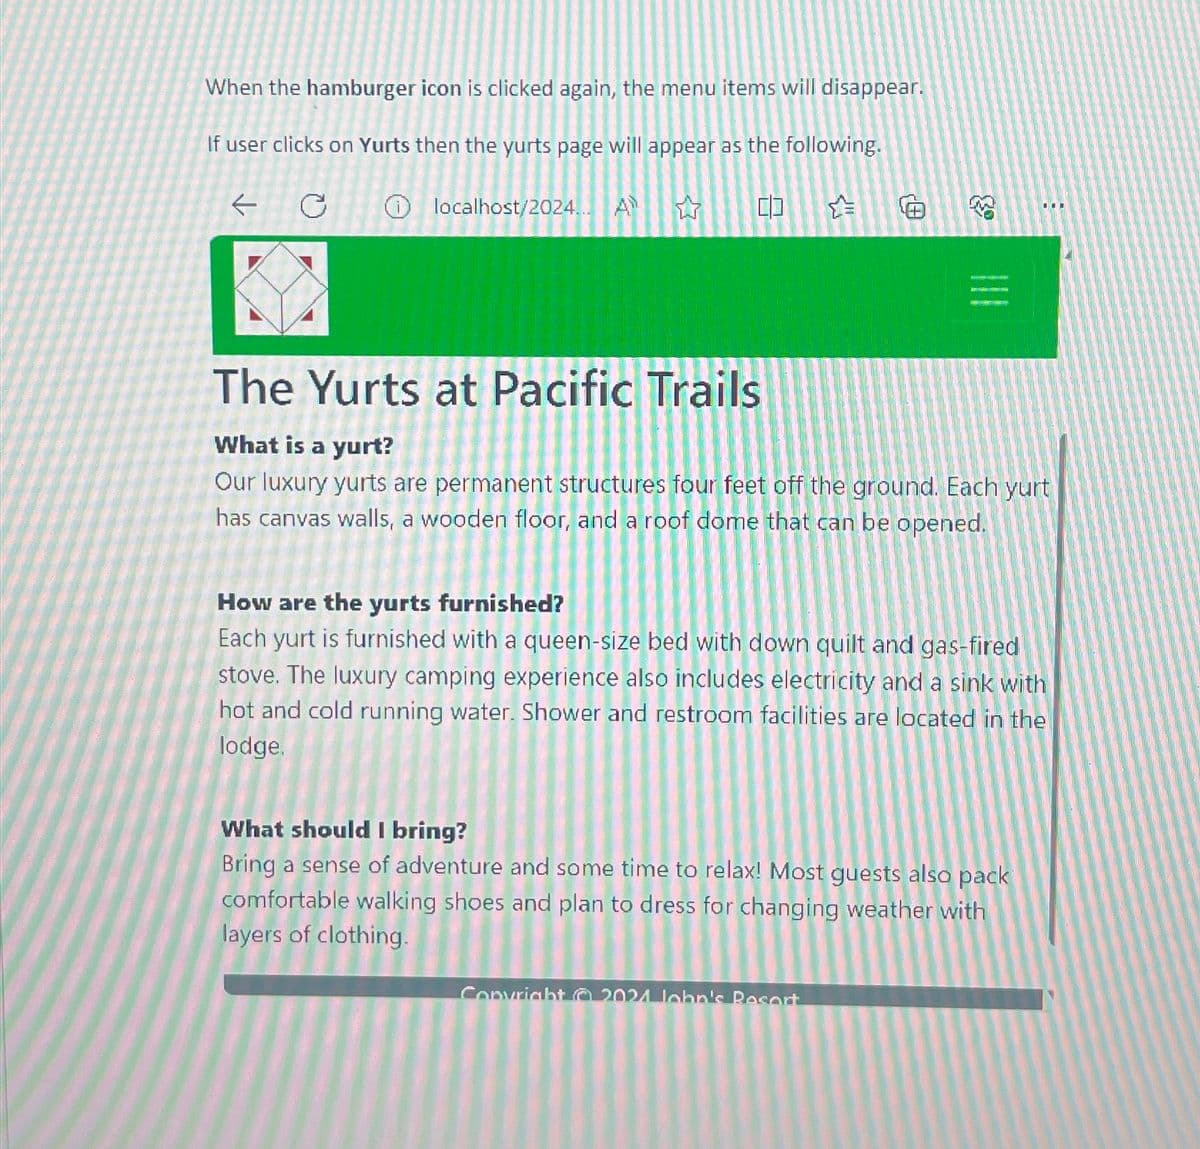 When the hamburger icon is clicked again, the menu items will disappear.
If user clicks on Yurts then the yurts page will appear as the following.
←
①localhost/2024... A
M
&
The Yurts at Pacific Trails
What is a yurt?
Our luxury yurts are permanent structures four feet off the ground. Each yurt
has canvas walls, a wooden floor, and a roof dome that can be opened.
How are the yurts furnished?
Each yurt is furnished with a queen-size bed with down quilt and gas-fired
stove. The luxury camping experience also includes electricity and a sink with
hot and cold running water. Shower and restroom facilities are located in the
lodge.
What should I bring?
Bring a sense of adventure and some time to relax! Most guests also pack
comfortable walking shoes and plan to dress for changing weather with
layers of clothing.
Copyright 2021 lebn's Resort